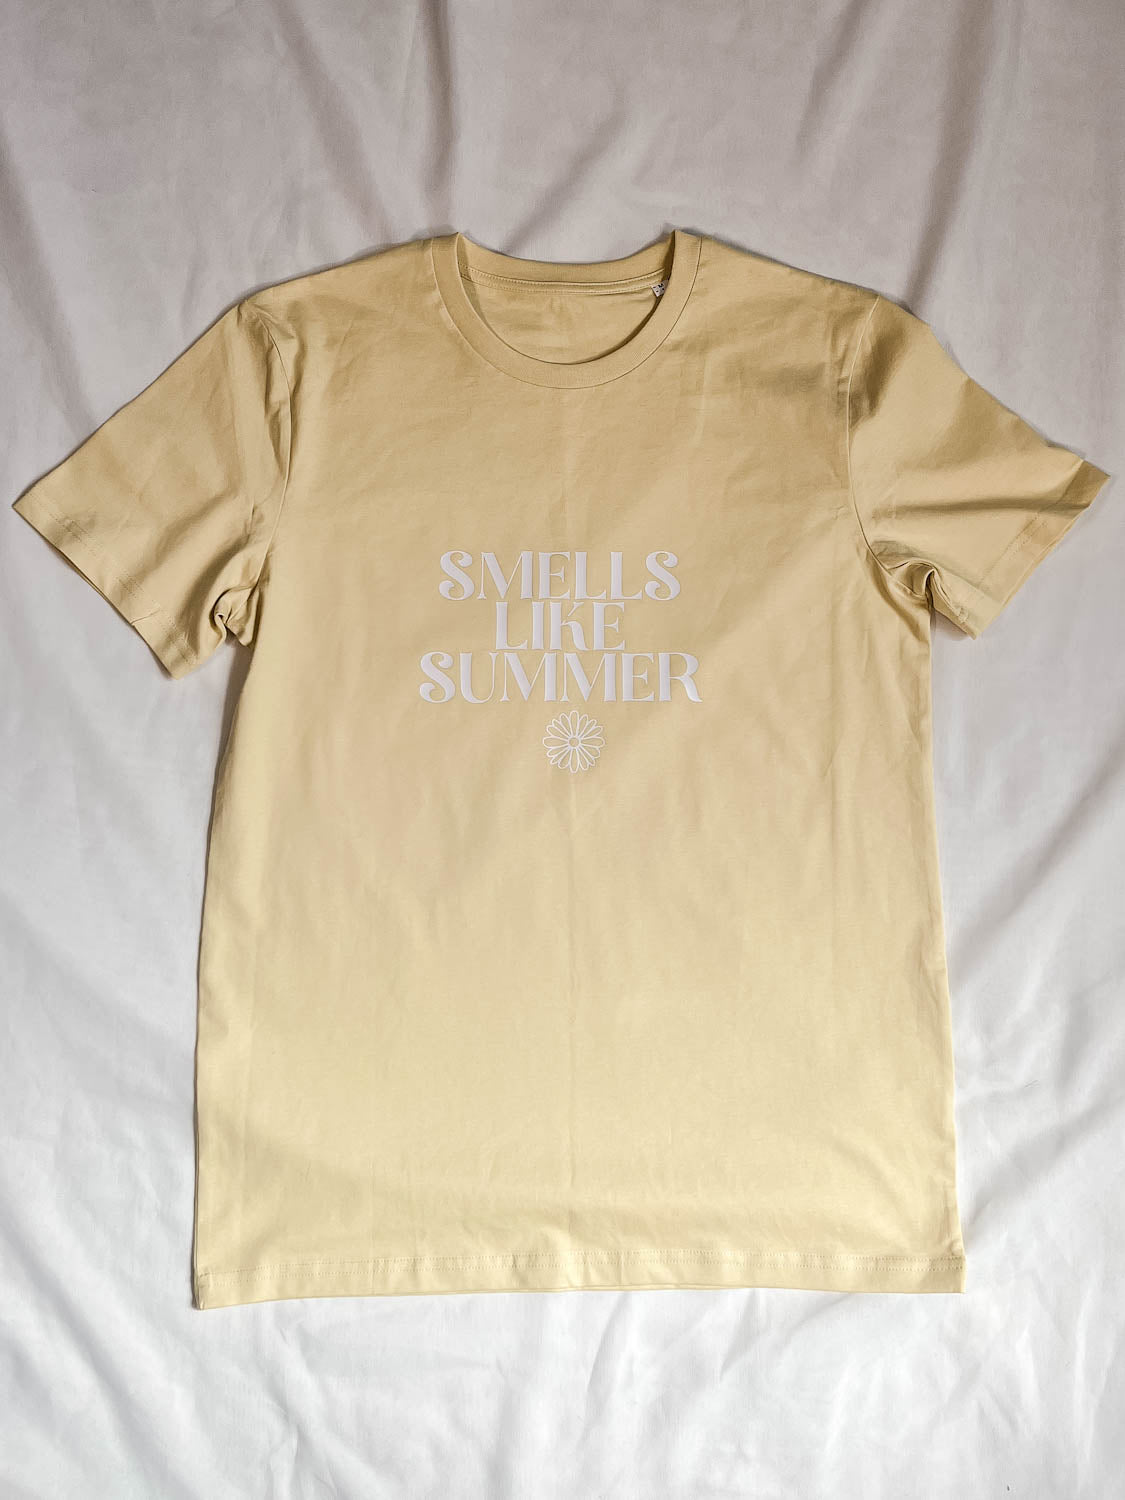 ONE OFF/SALE -Smells Like Summer T-Shirt Yellow M Out The Purse